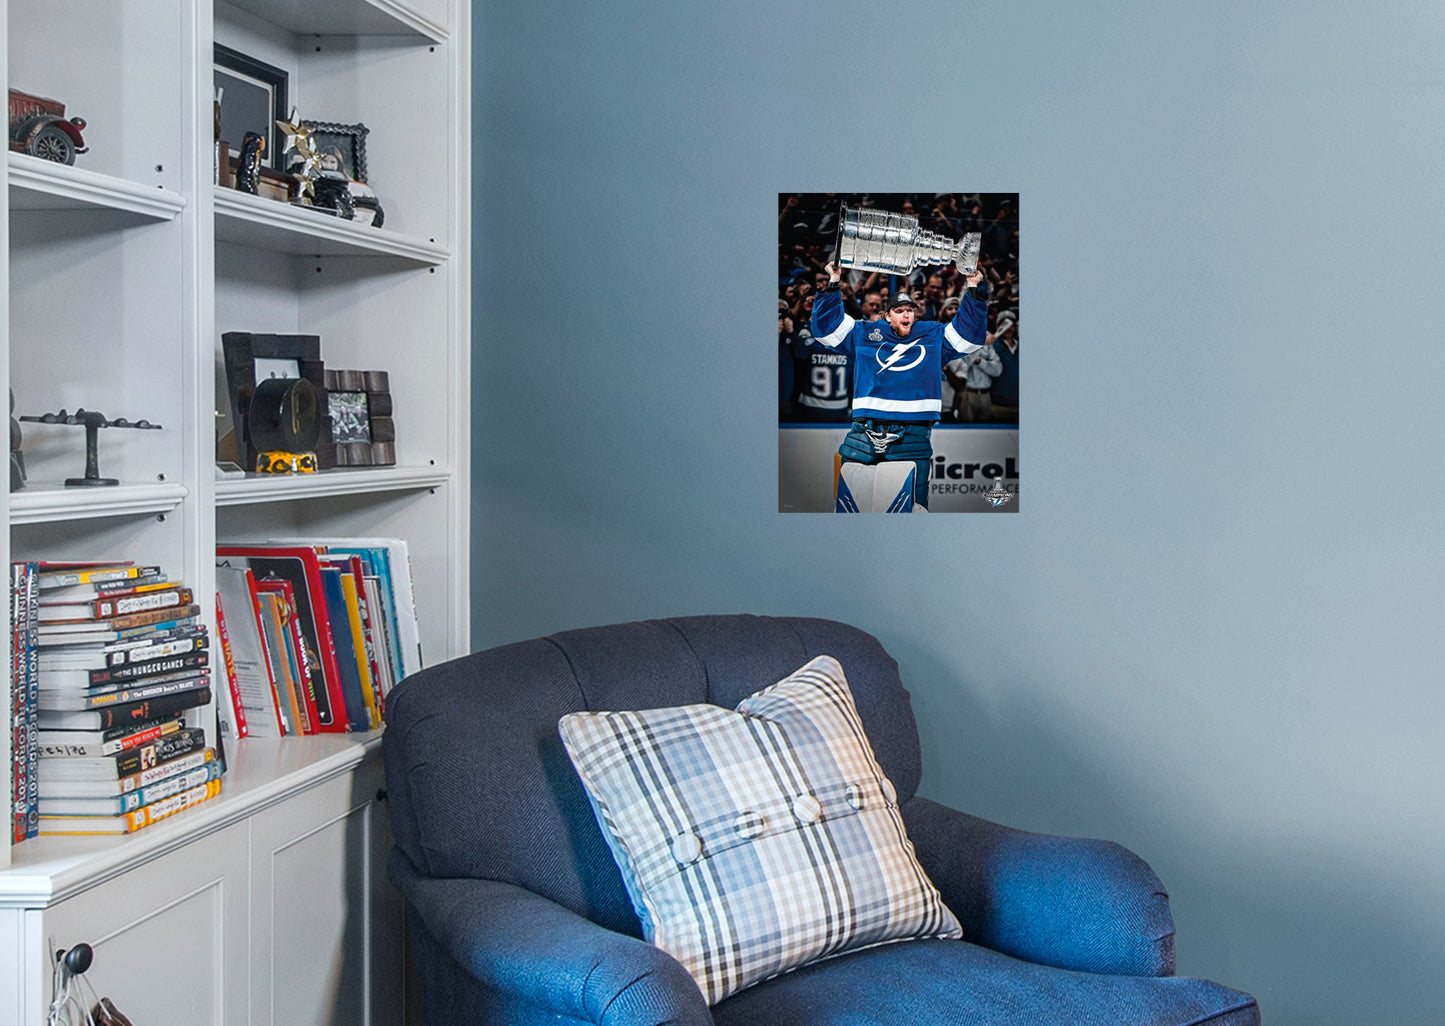 Tampa Bay Lightning: Andrei Vasilevskiy 2020 Stanley Cup Hoist Mural        - Officially Licensed NHL Removable Wall   Adhesive Decal